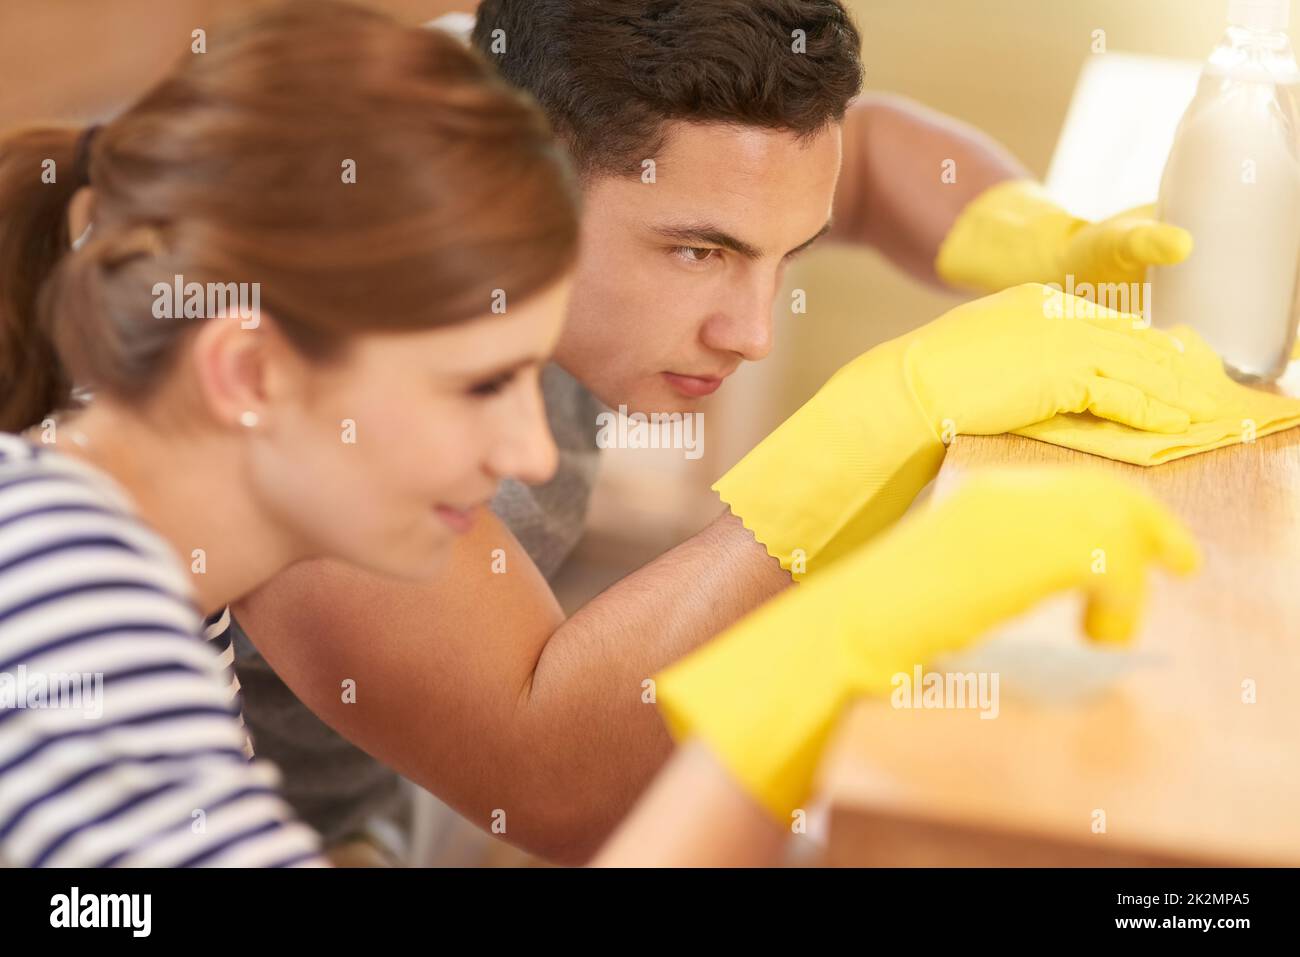 Theyve perfected cleaning to an art. Shot of a happy young couple cleaning their kitchen together. Stock Photo